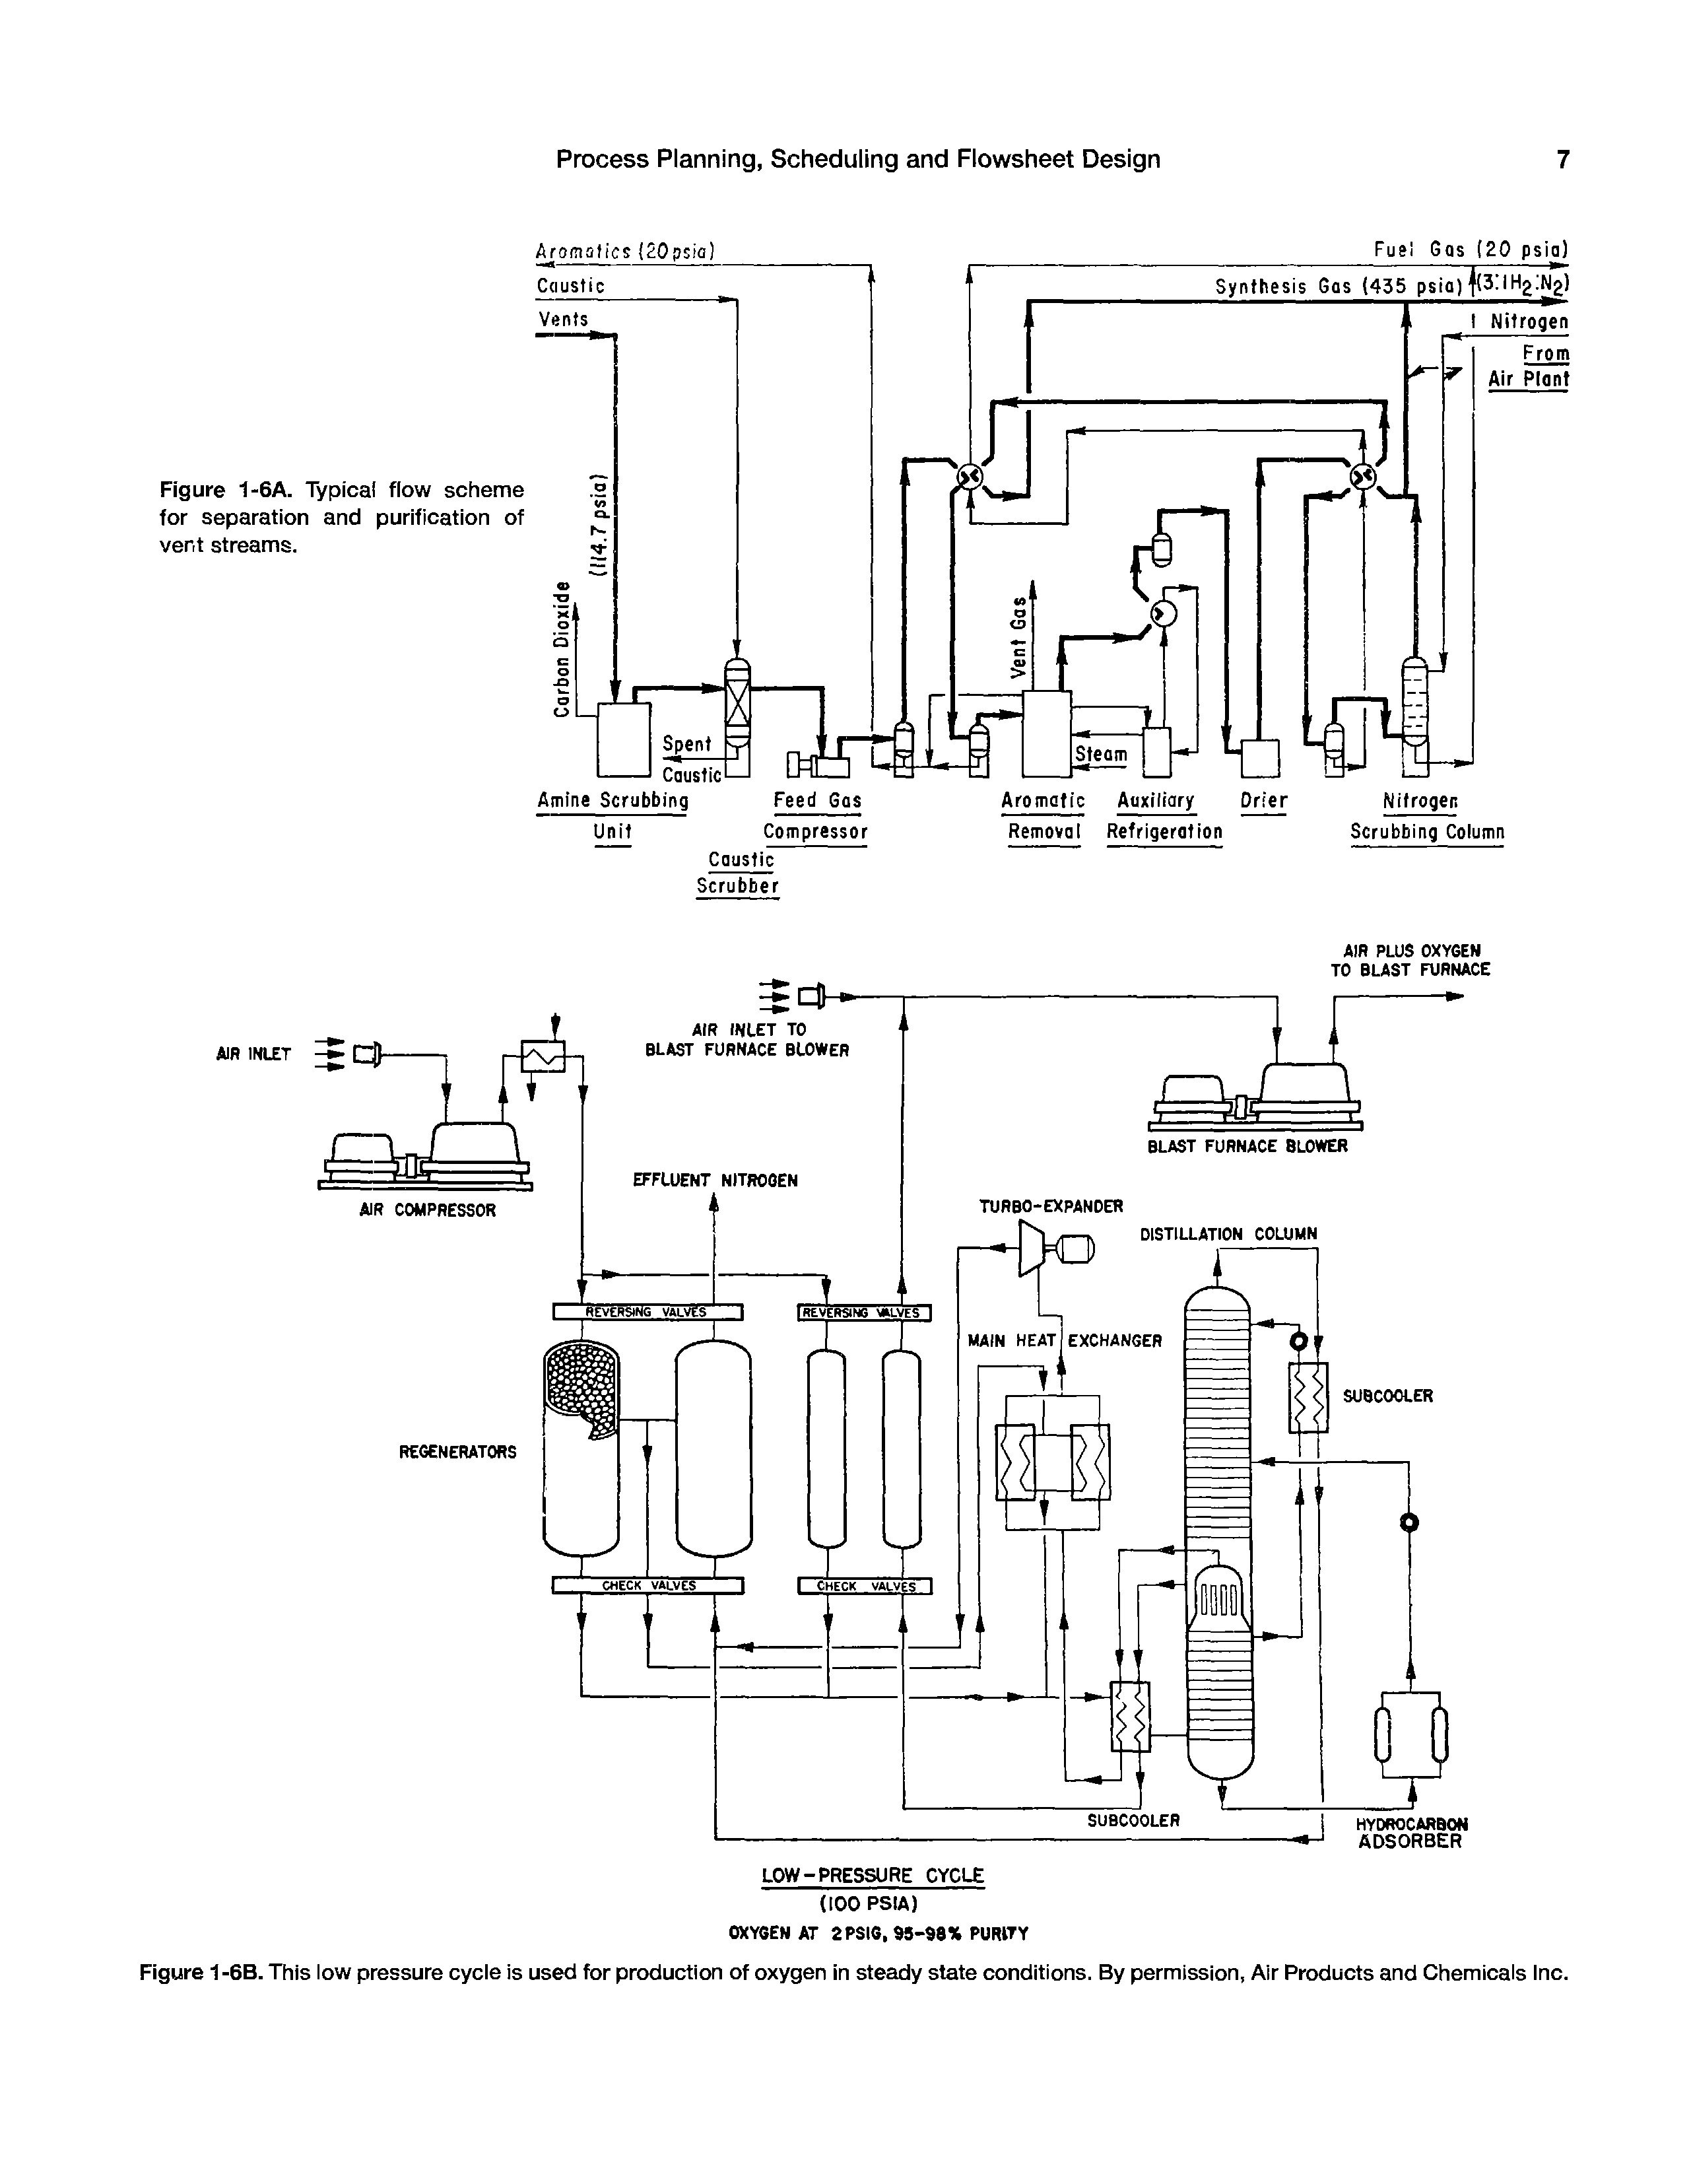 Figure 1-6B. This low pressure cycle is used for production of oxygen in steady state conditions. By permission, Air Products and Chemicals Inc.